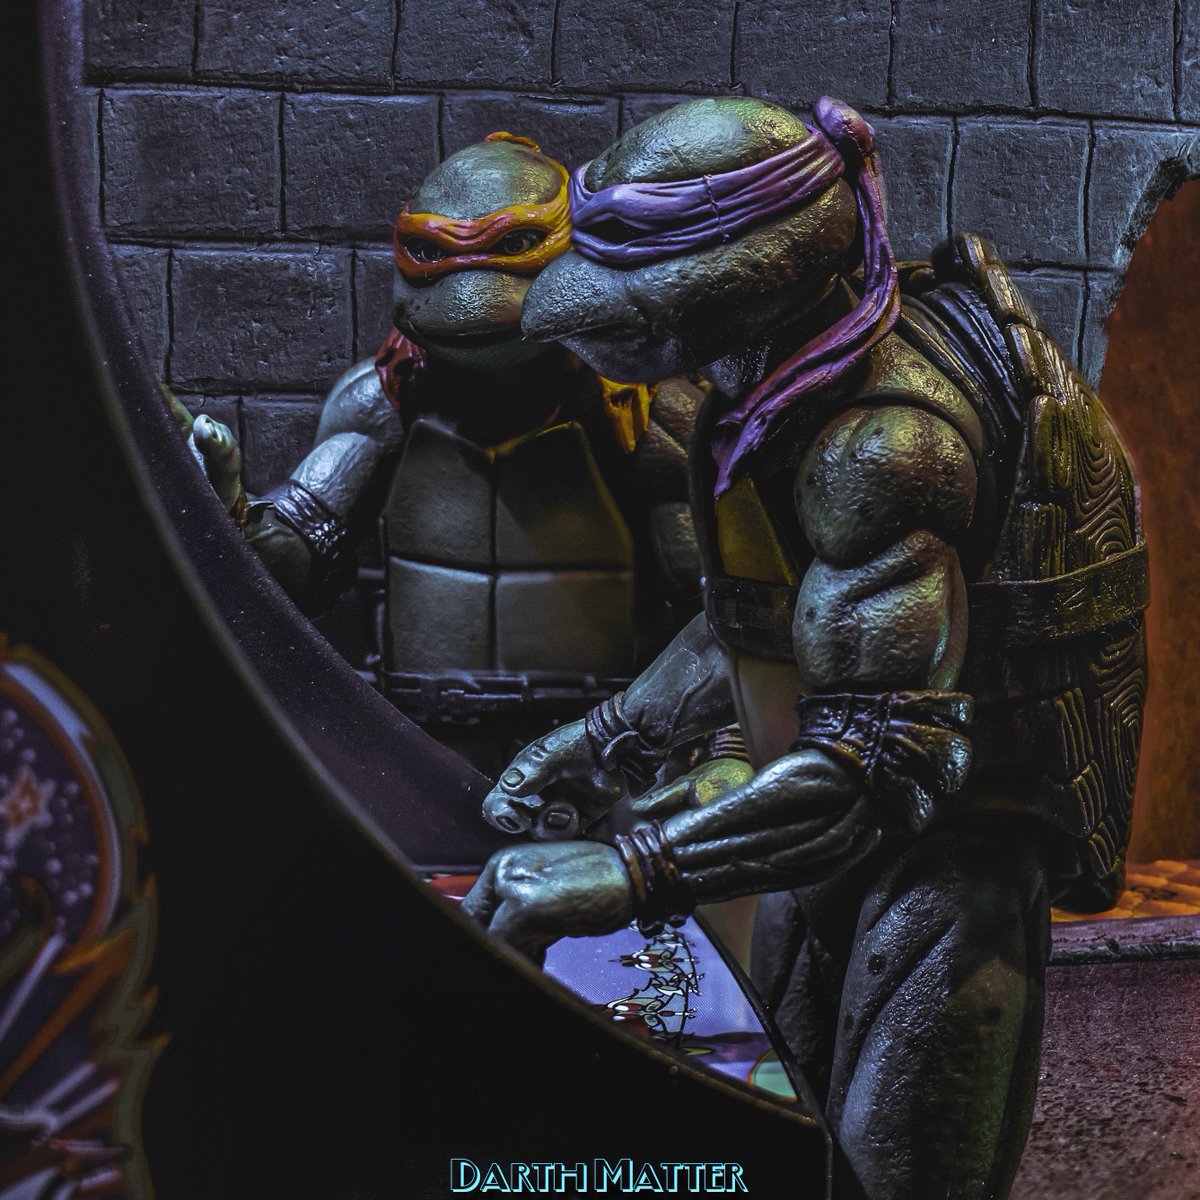 Oh man!!!! Donnie is going for the high score!!!! #teenagemutantninjaturtles #tmnt #necaofficial #neca #necatmnt #arcade #toyphotography #toypics